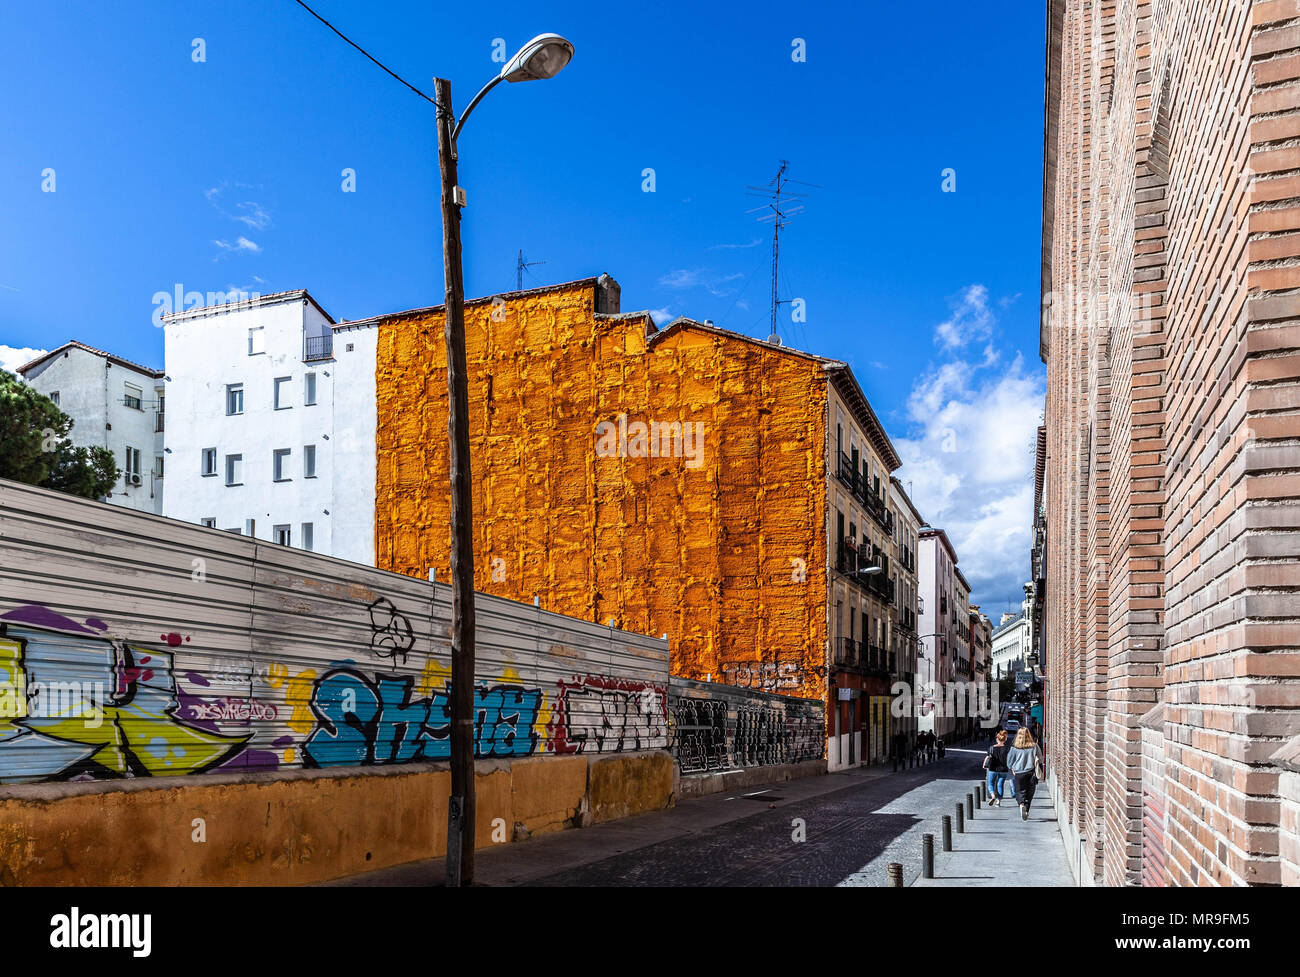 Building side wall covered in orange insulation foam, Madrid, Spain. Stock Photo